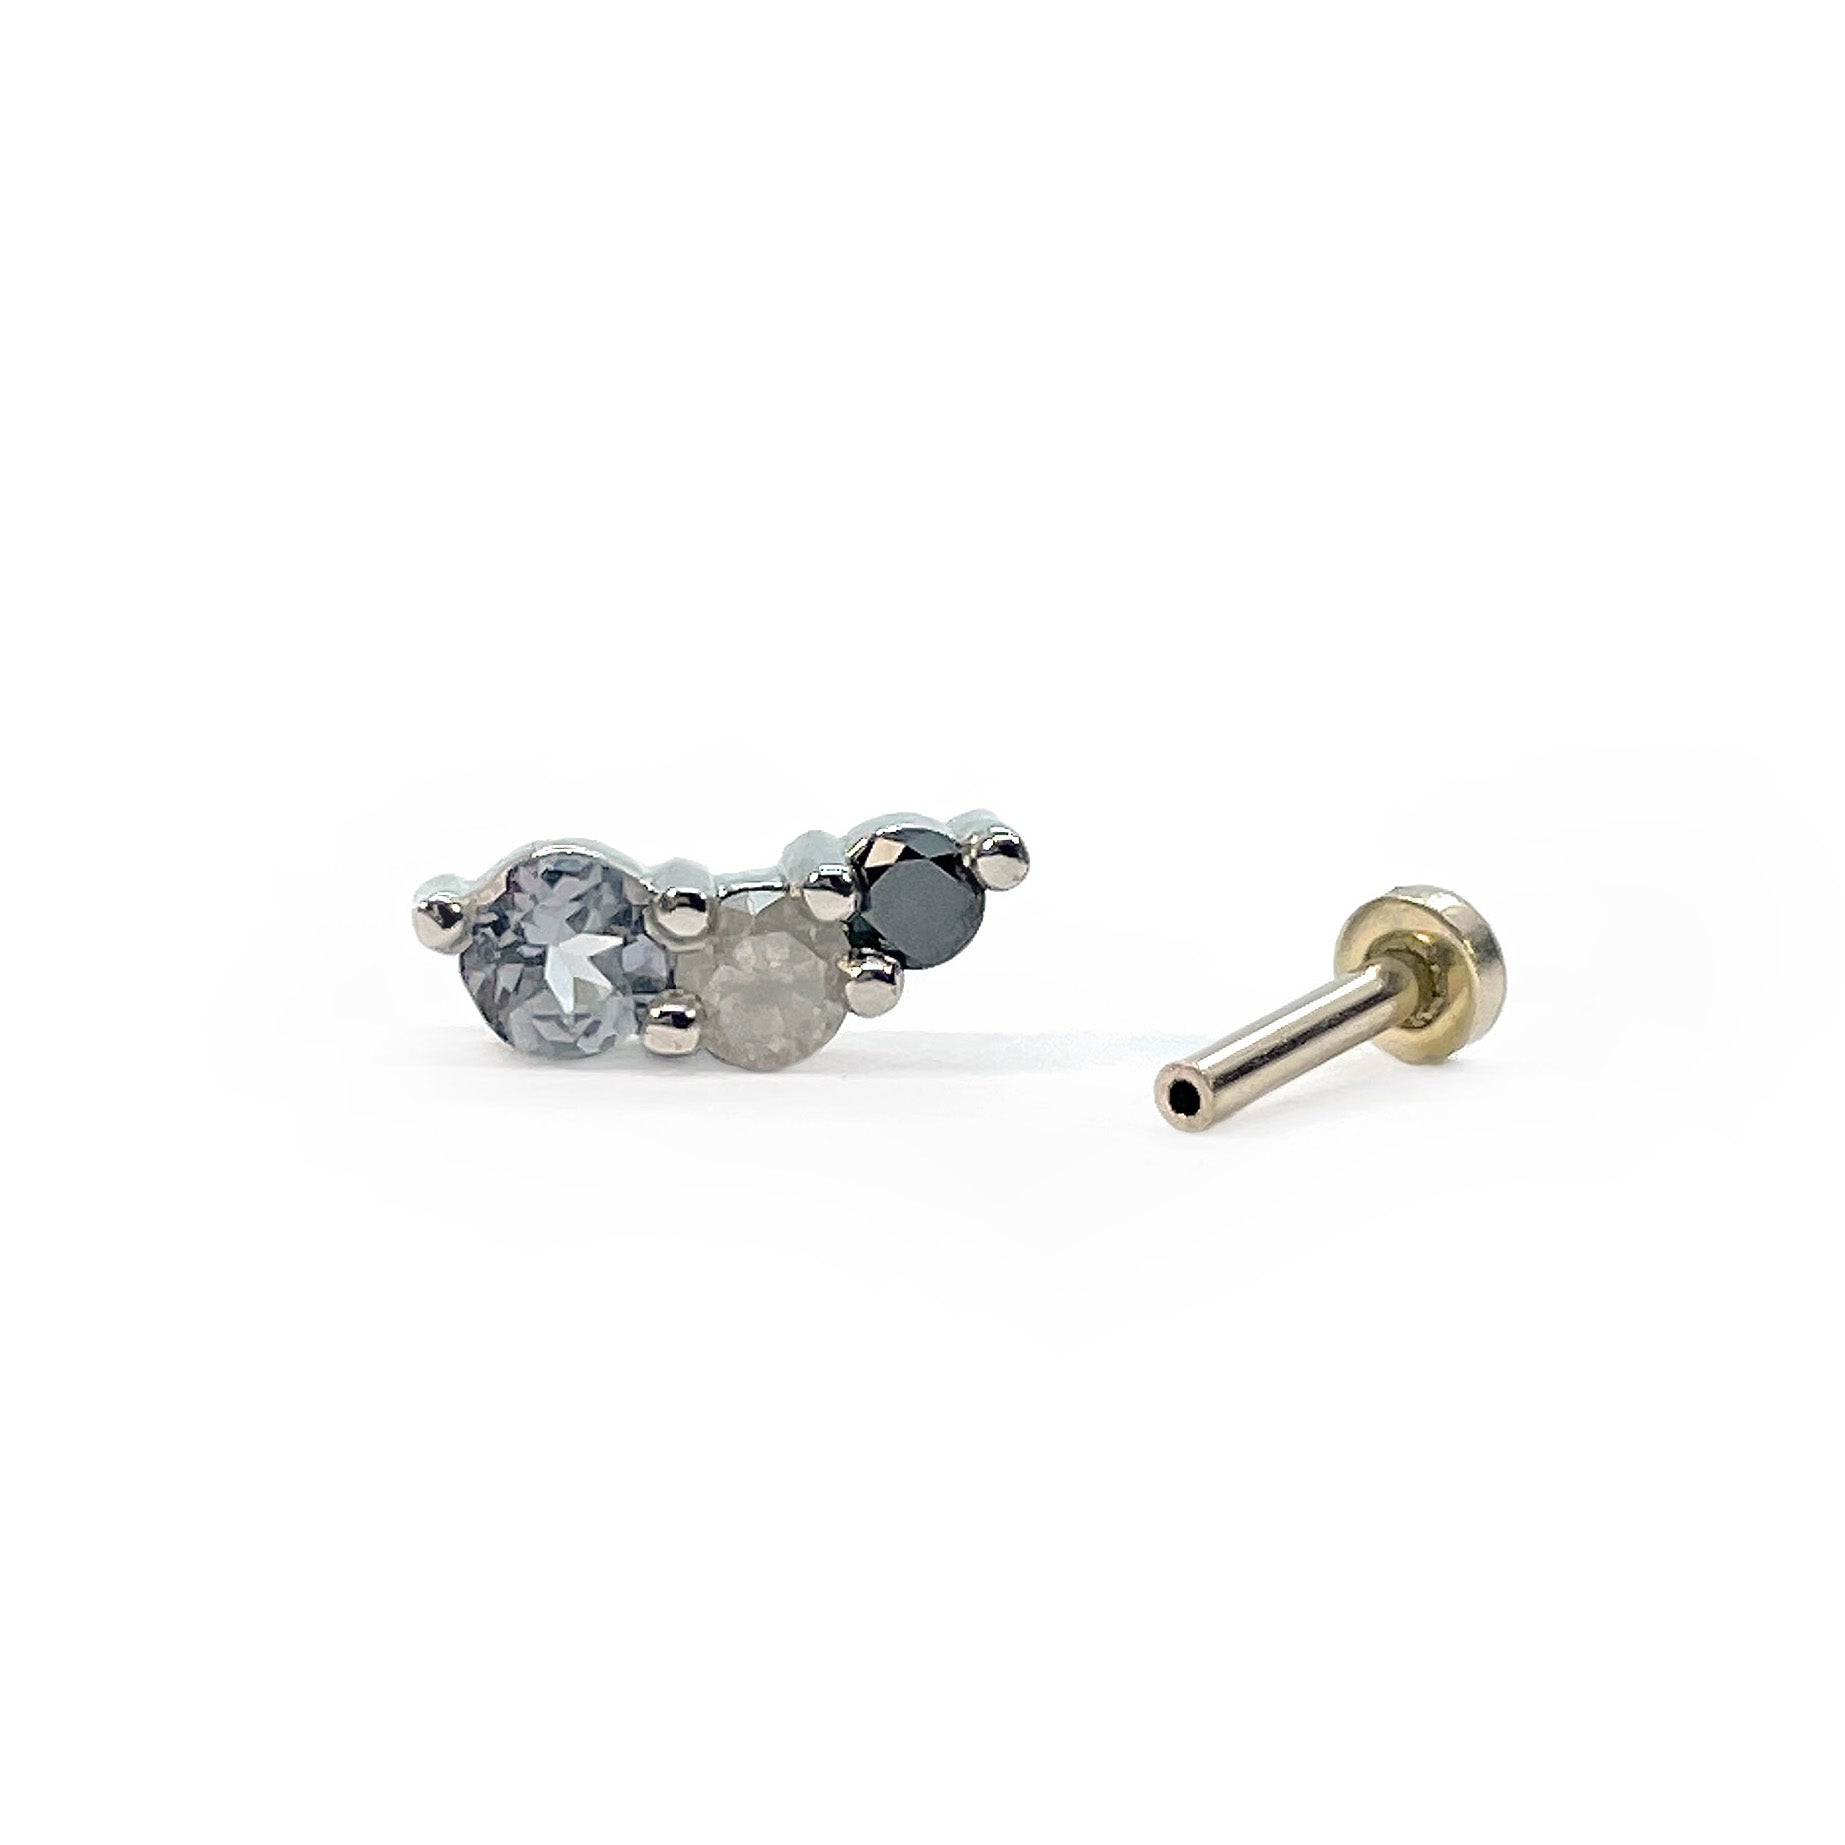 6mm Pad USA Surgical Stainless Steel Studs - Clutch Variations - Standard  Length Post Hypoallergenic Surgical Steel